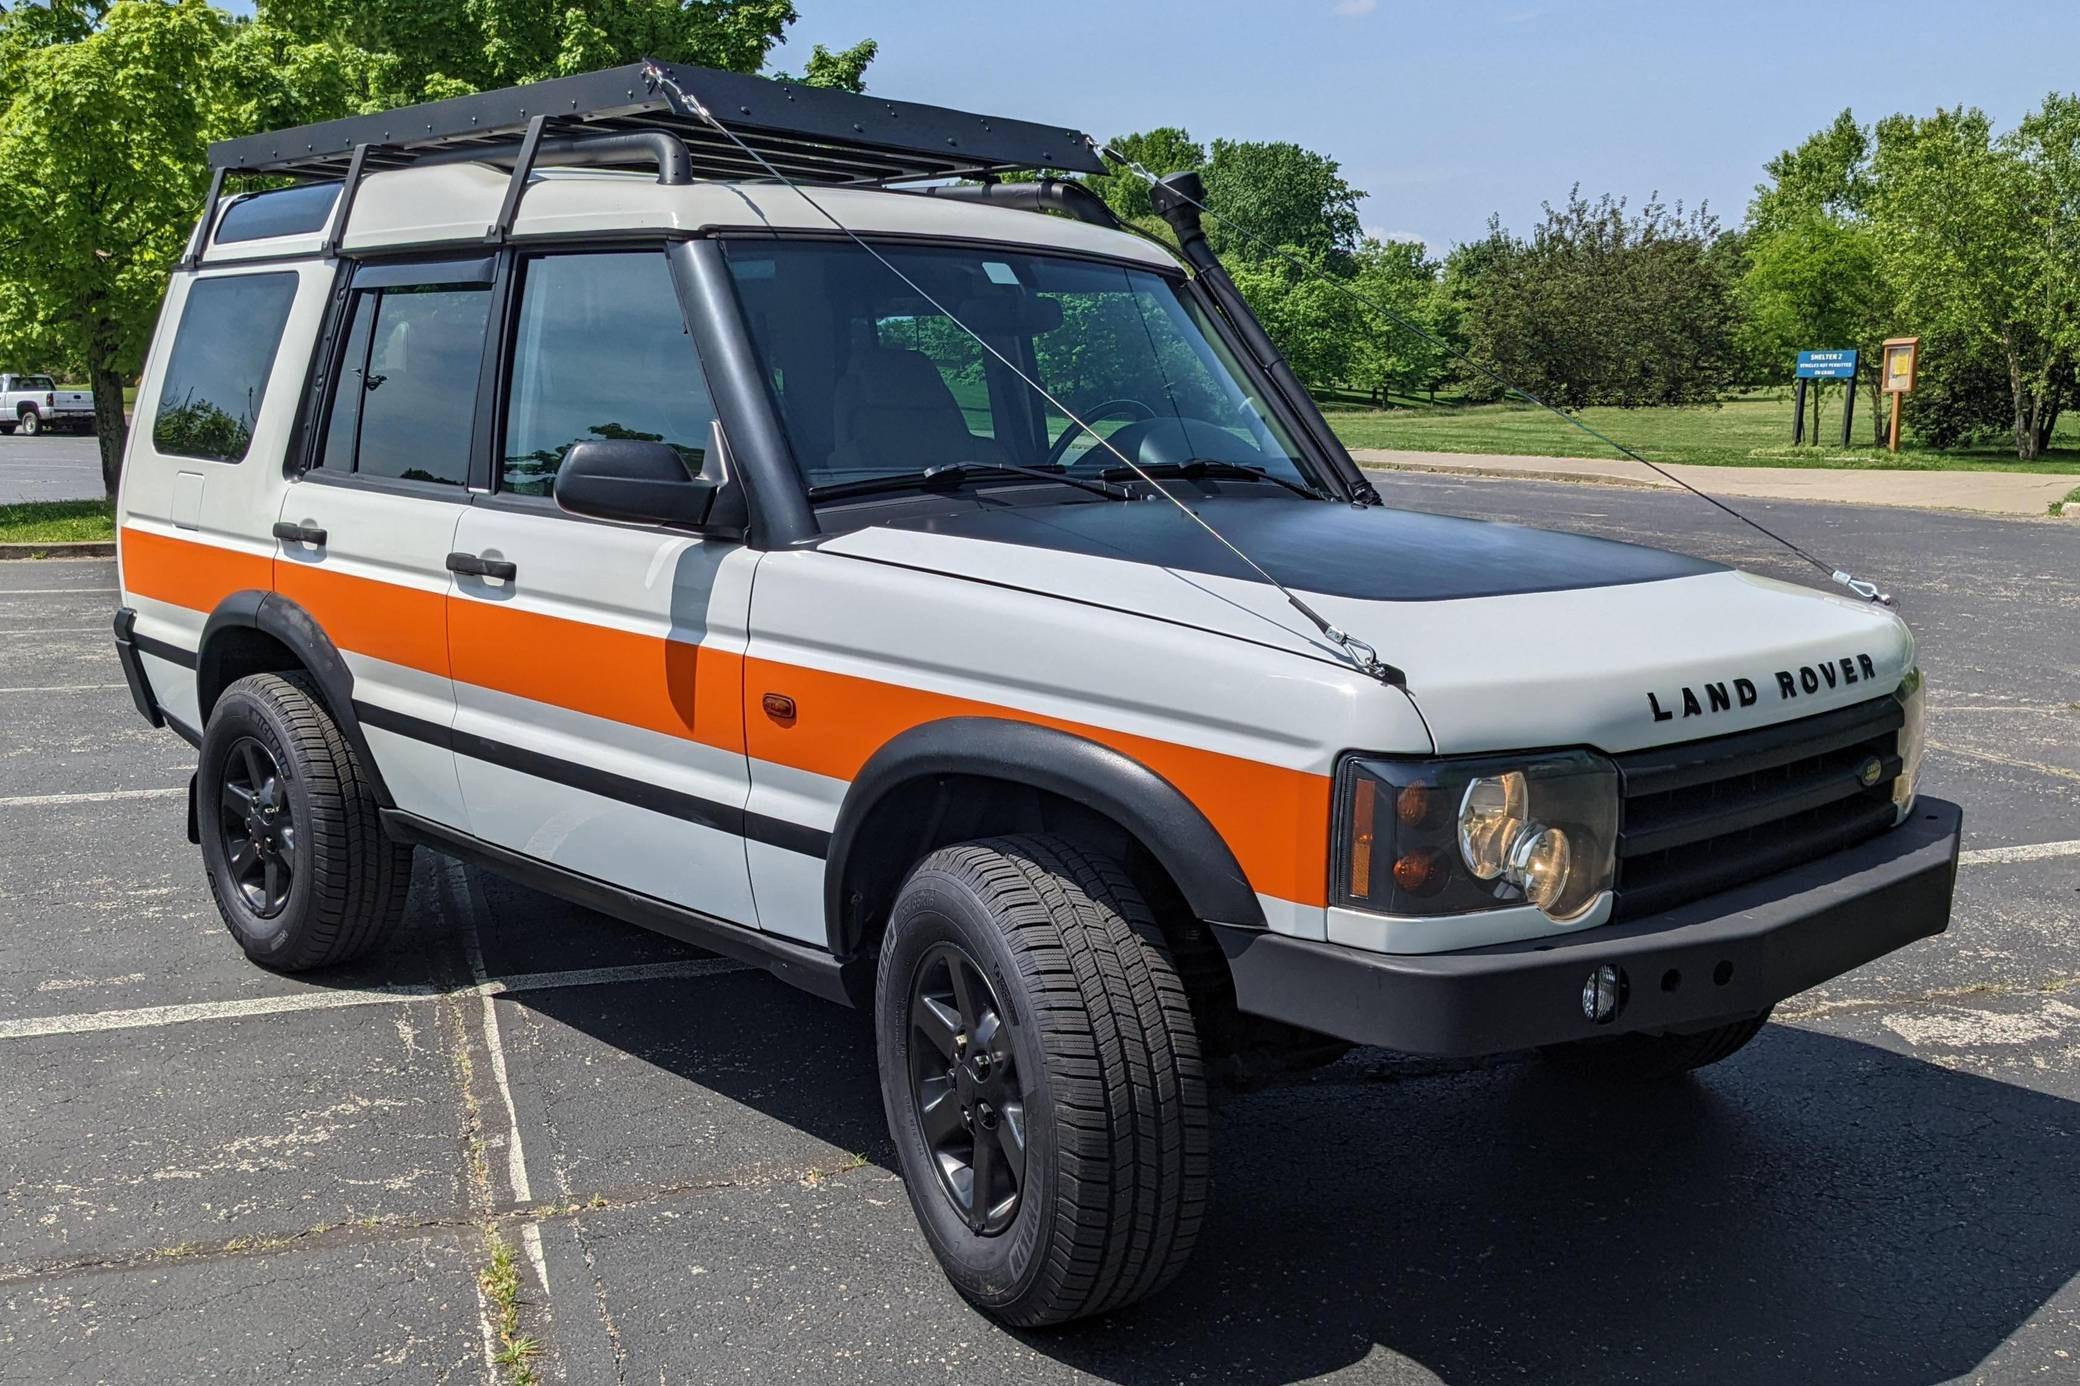 Discovery 4 5.0-litre V8 - Land Rover Monthly